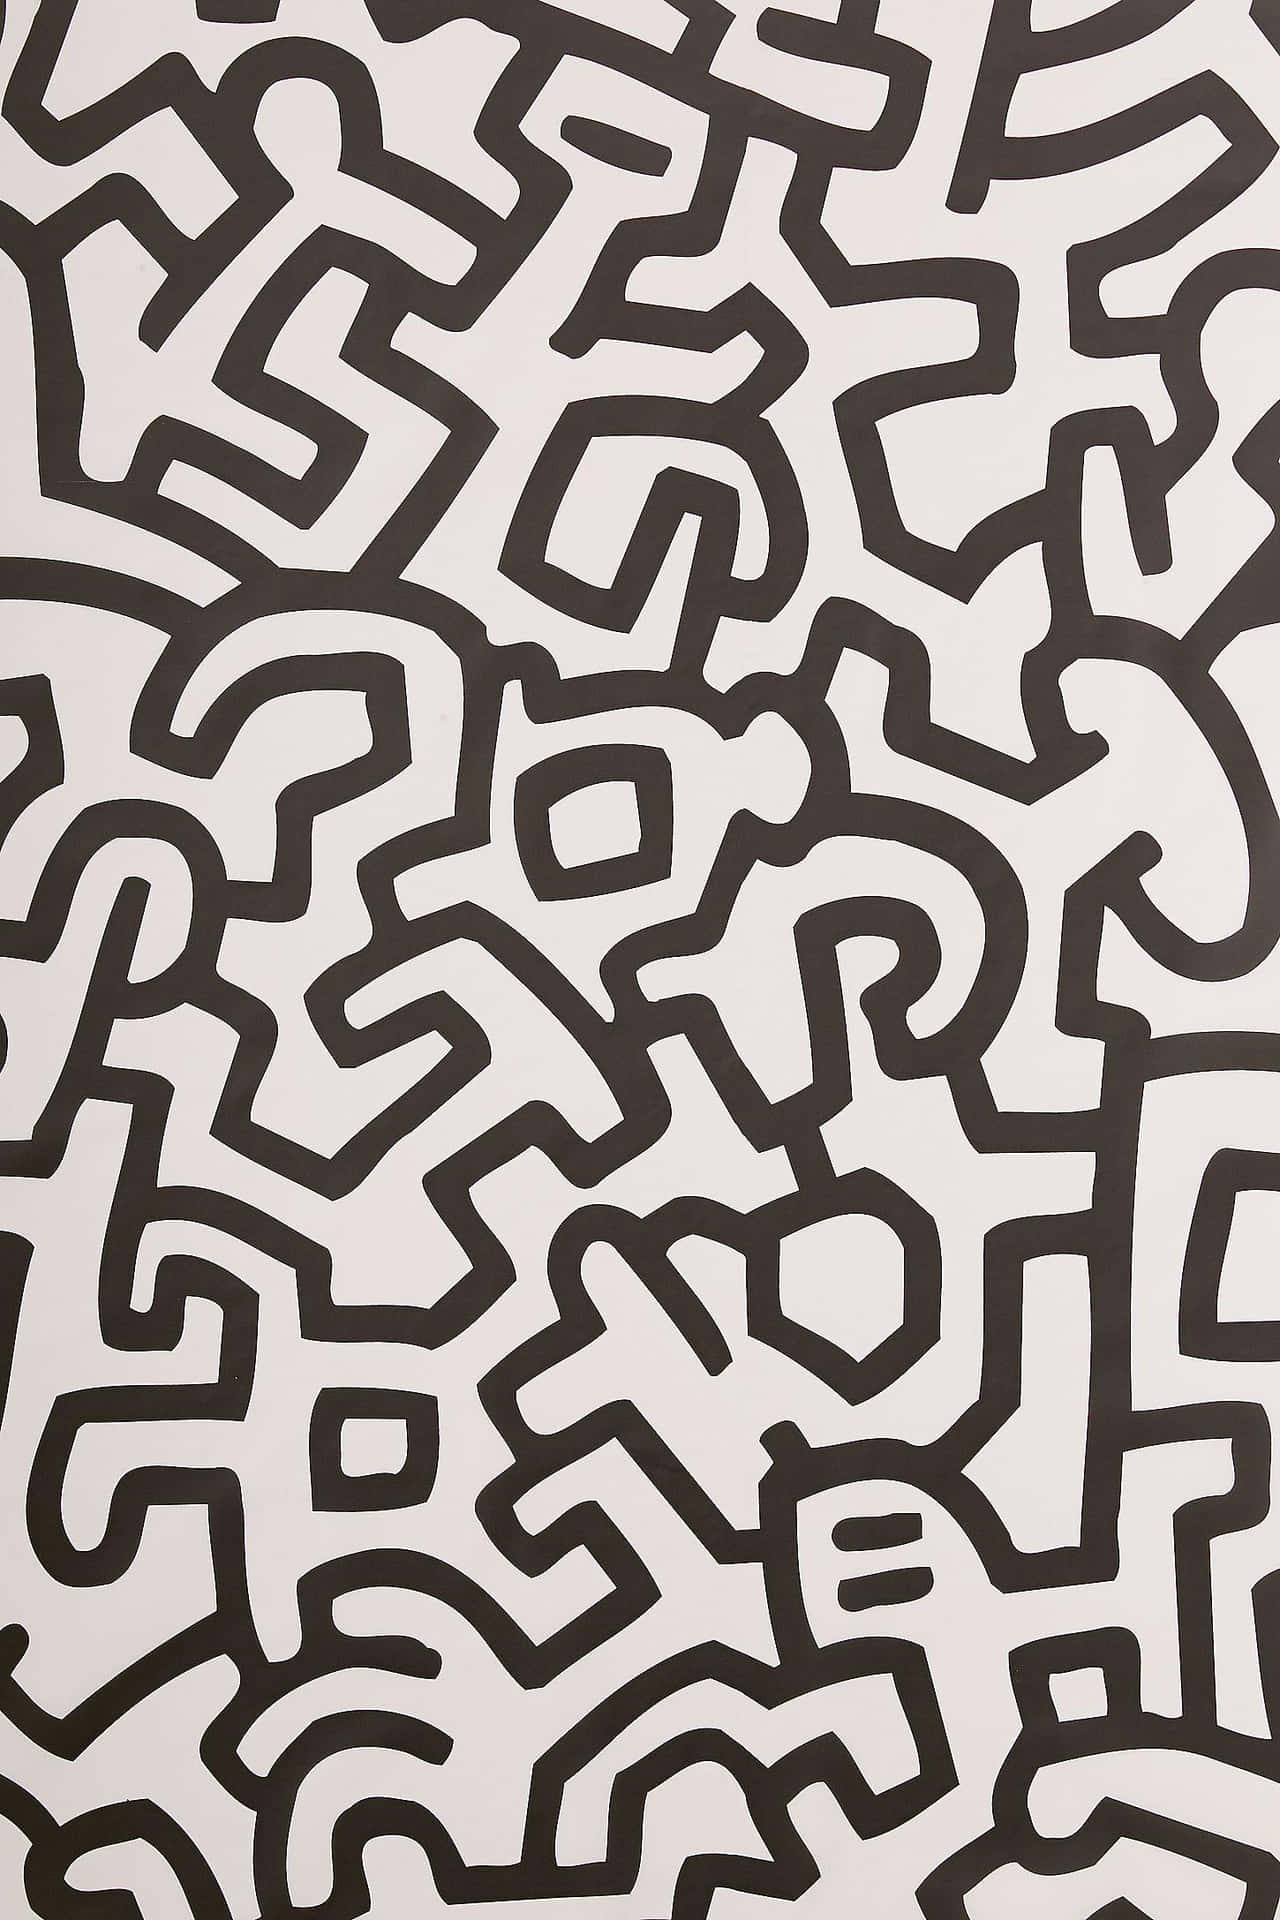 Keith Haring Inspired Abstract Pattern Wallpaper